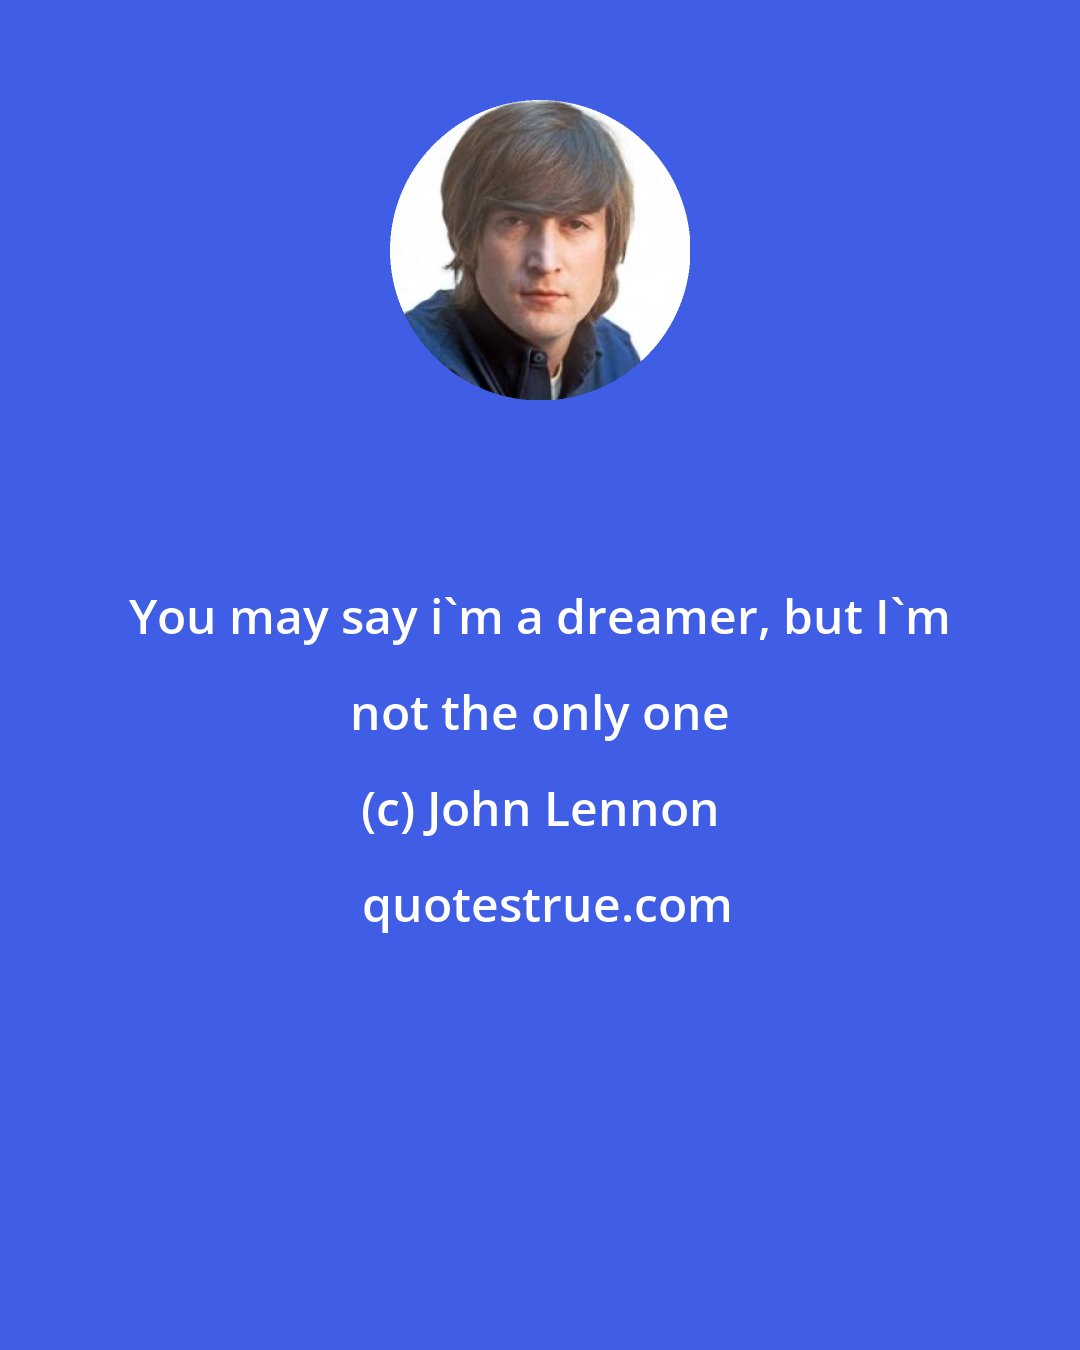 John Lennon: You may say i'm a dreamer, but I'm not the only one